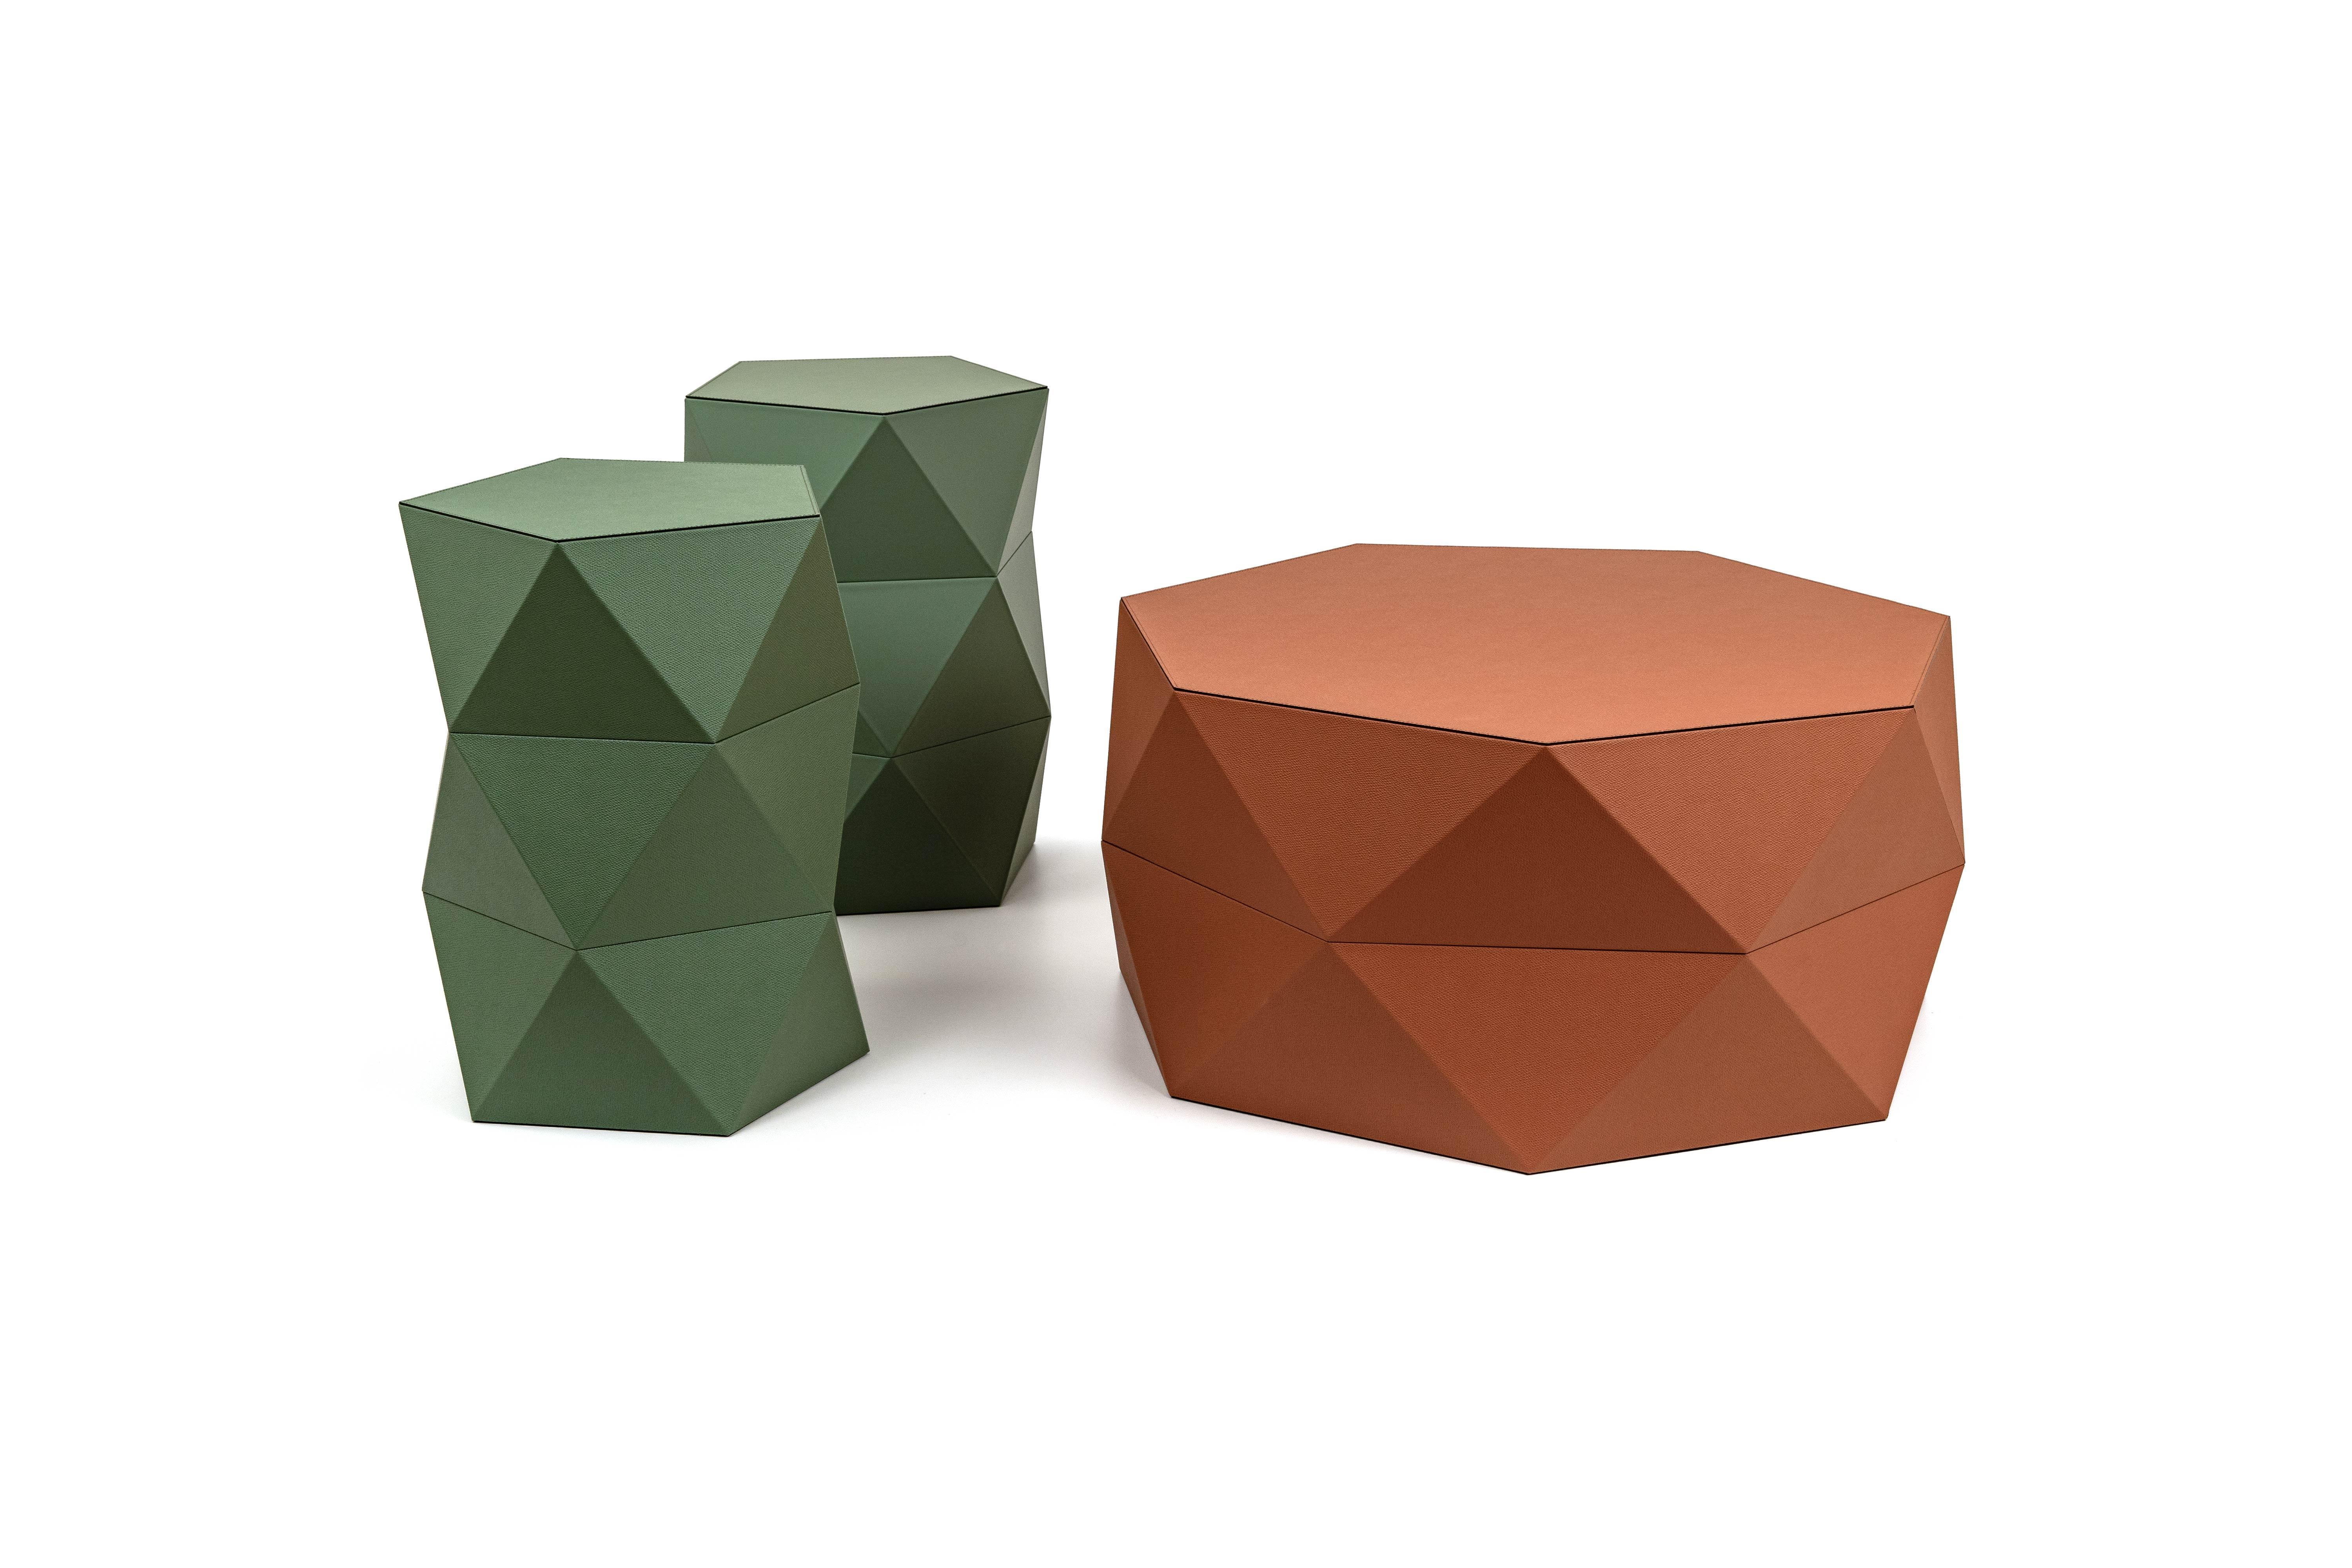 A new collection joined the Pinetti family.

Euclide with its geometric look is an elegant stool crafted with wood structure and entirely covered in recycled leather. This lovely stool creates a perfect sitting area if matched with its own coffee